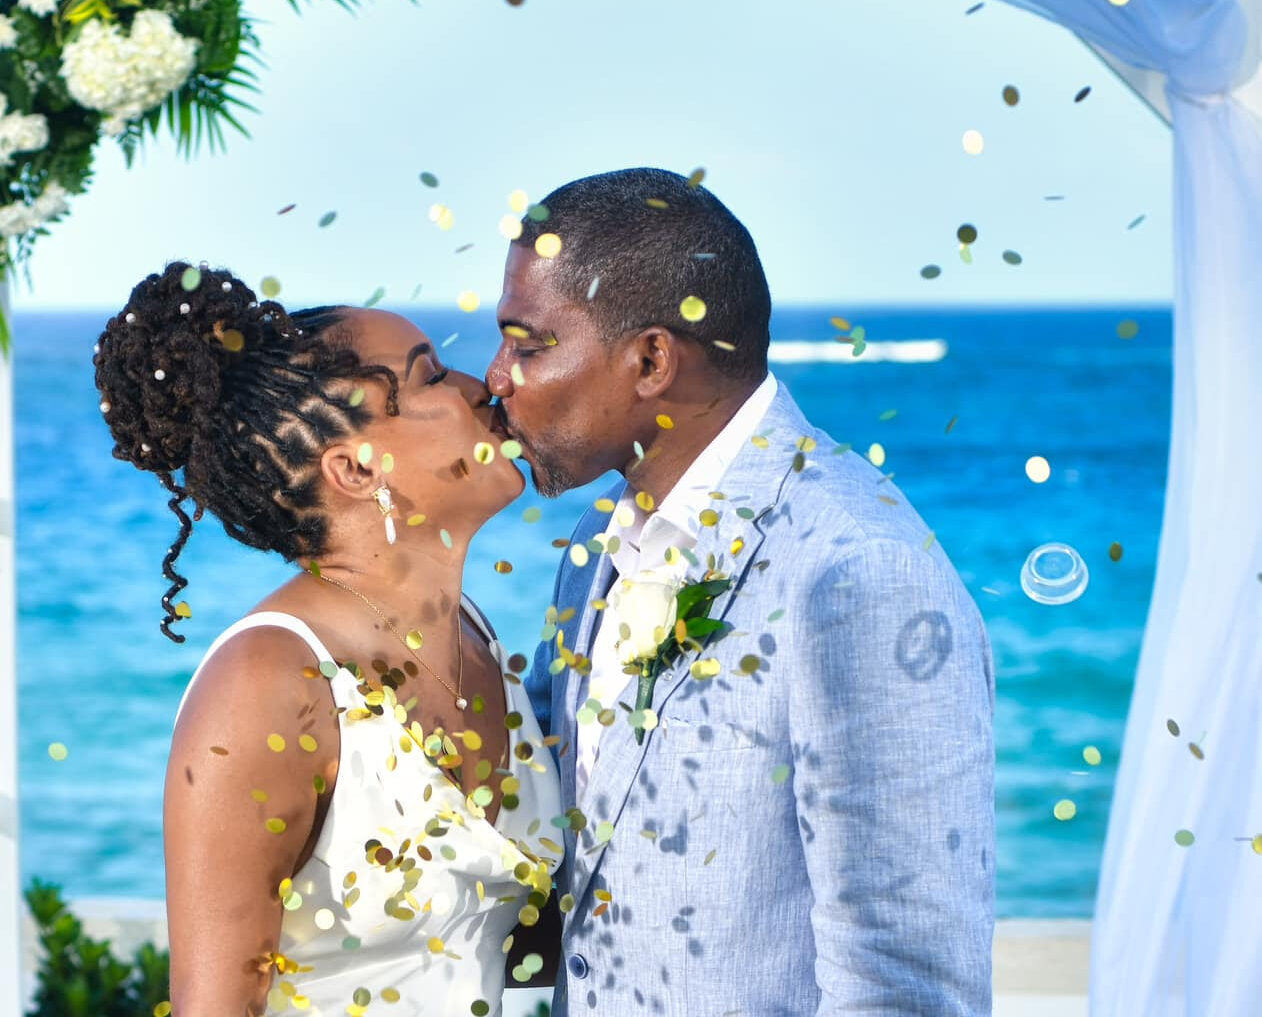 St Kitts and Nevis Prime Minister ties the knot in Barbados